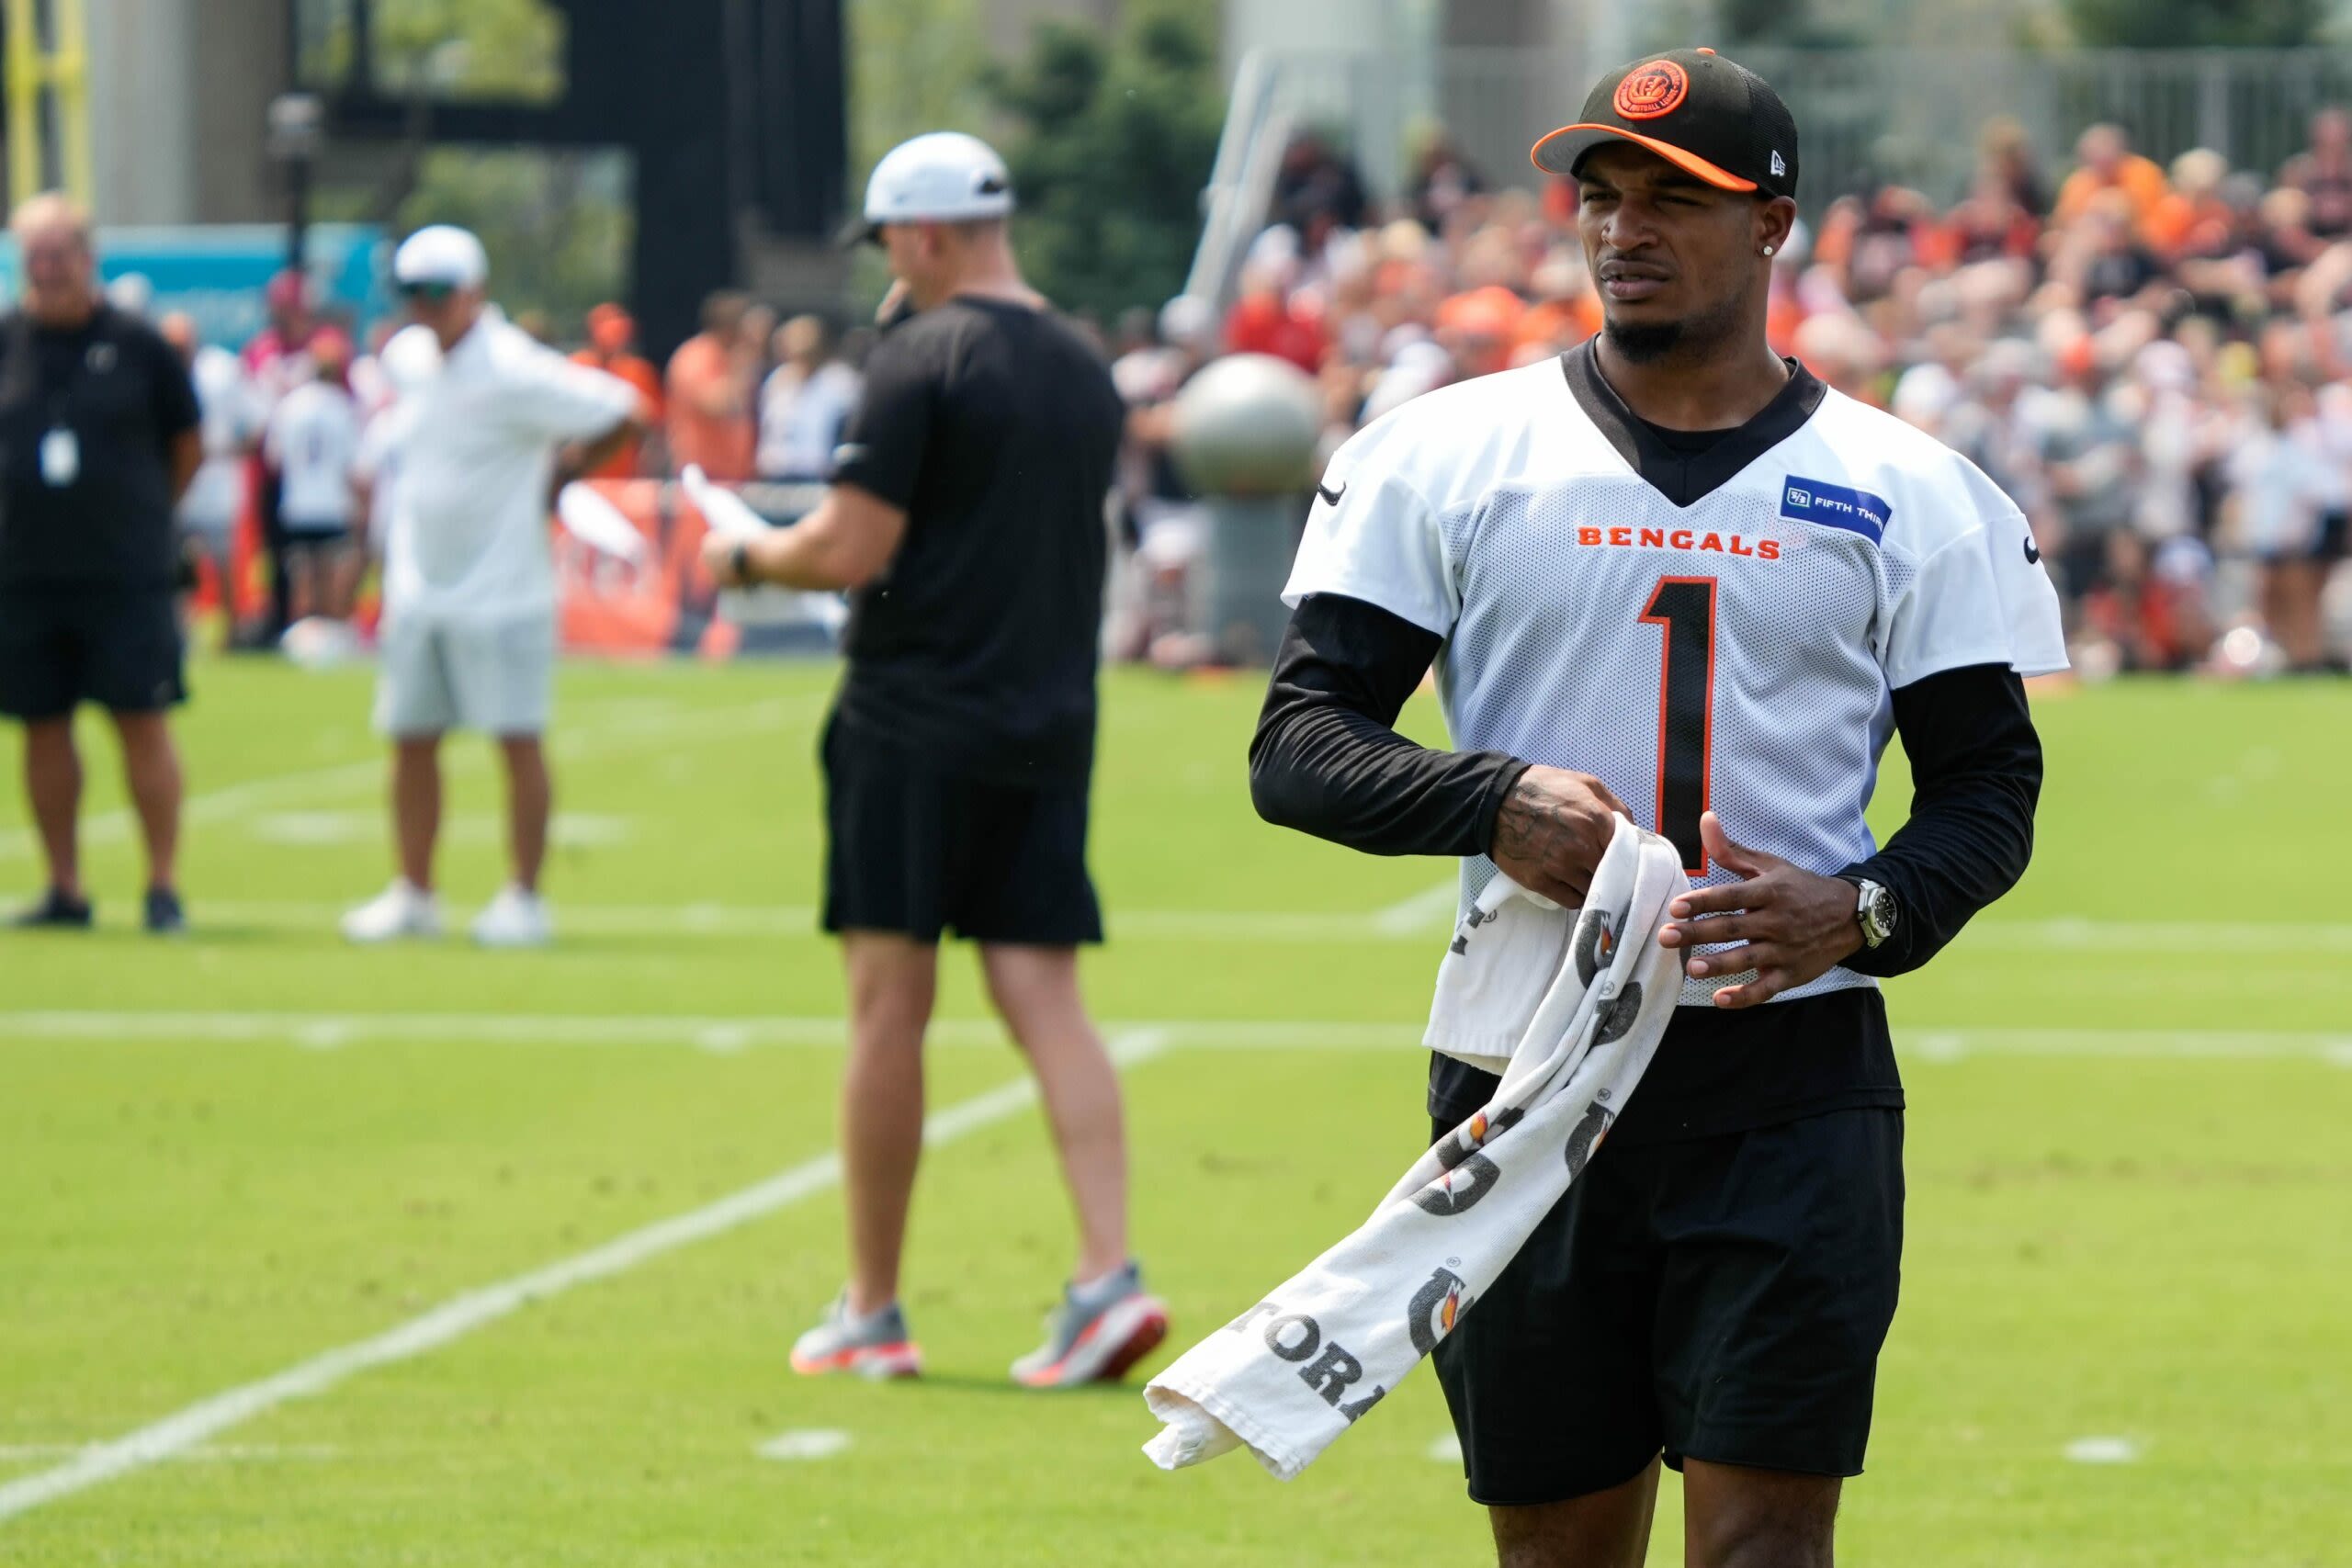 10 thoughts about the first practice of Bengals training camp